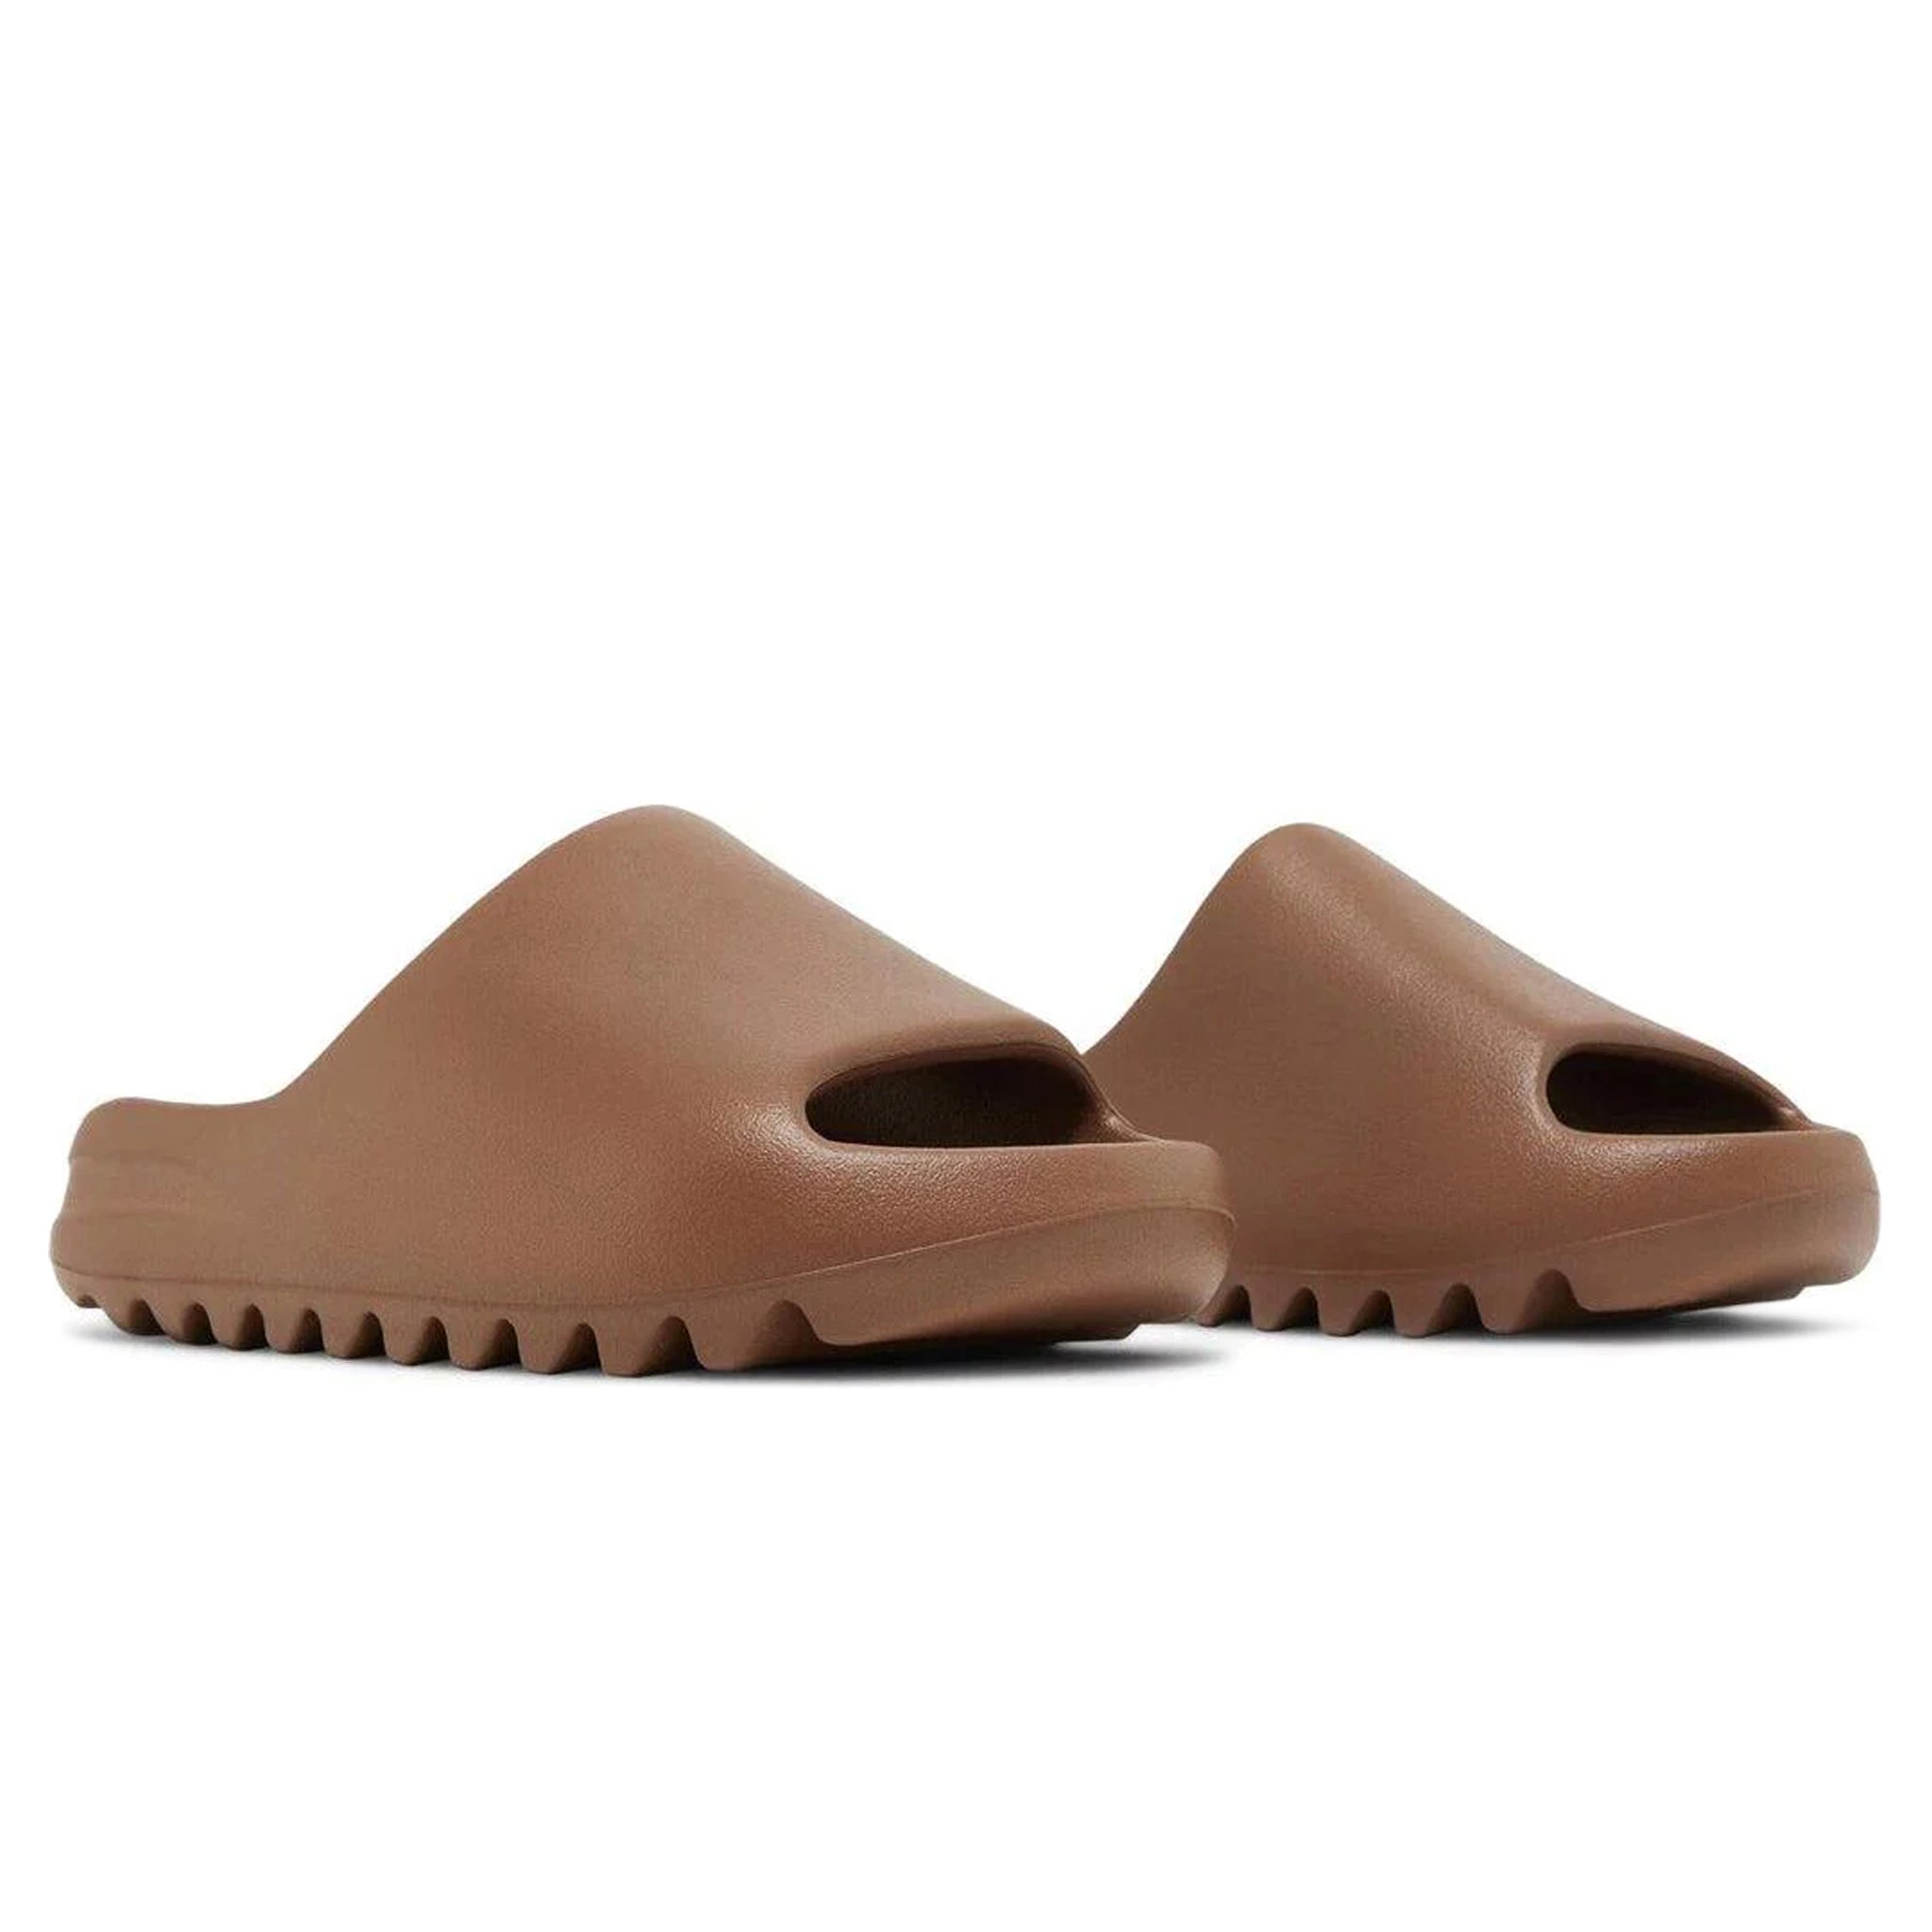 Front side view of Adidas Yeezy Slide Flax FZ5896